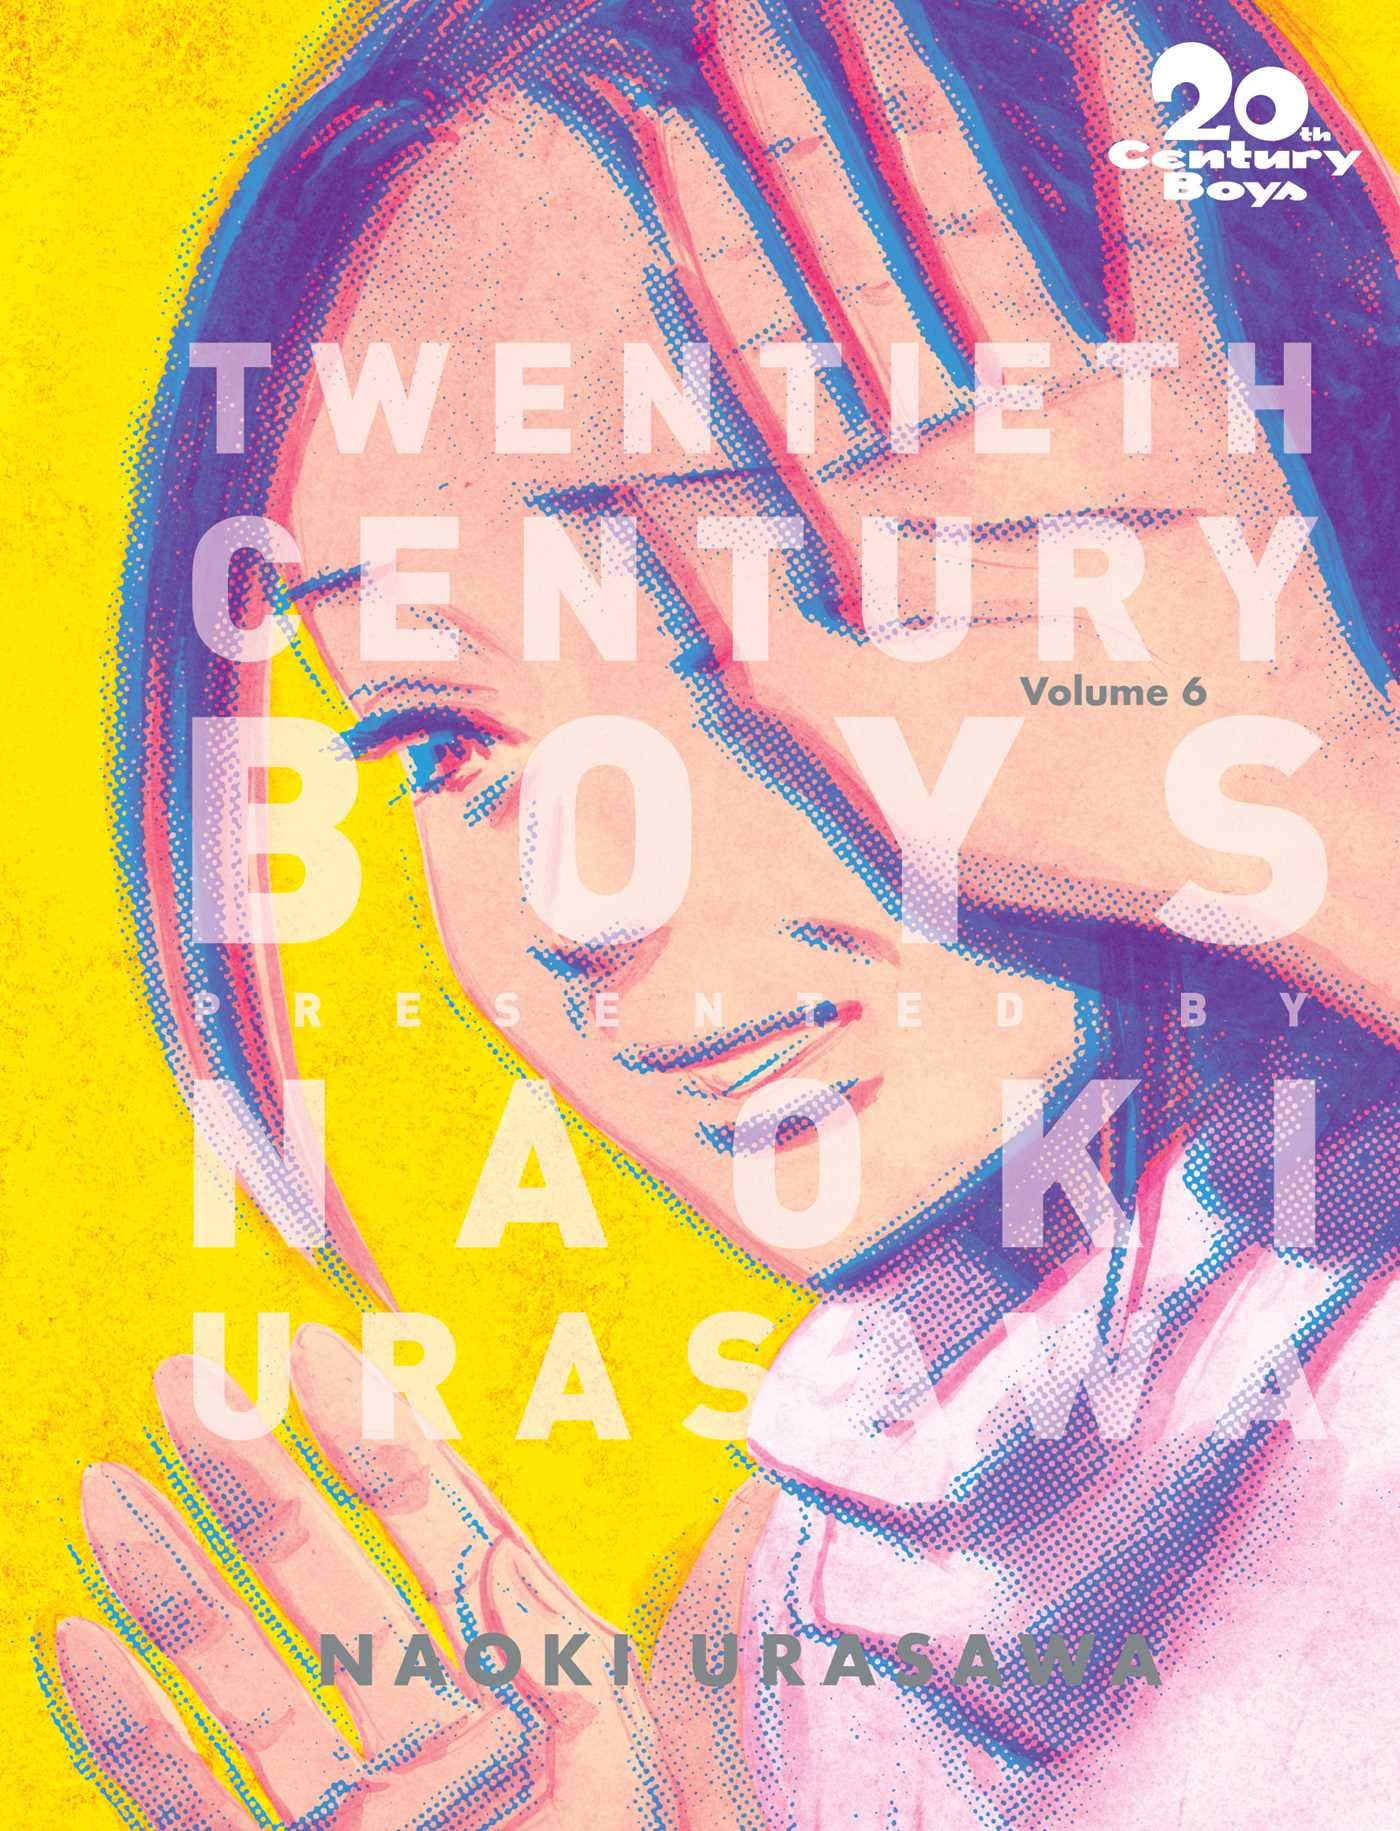 20th Century Boys: The Perfect Edition, Vol. 6 (Volume 6) Paperback – Dec 17 2019 King Gaming